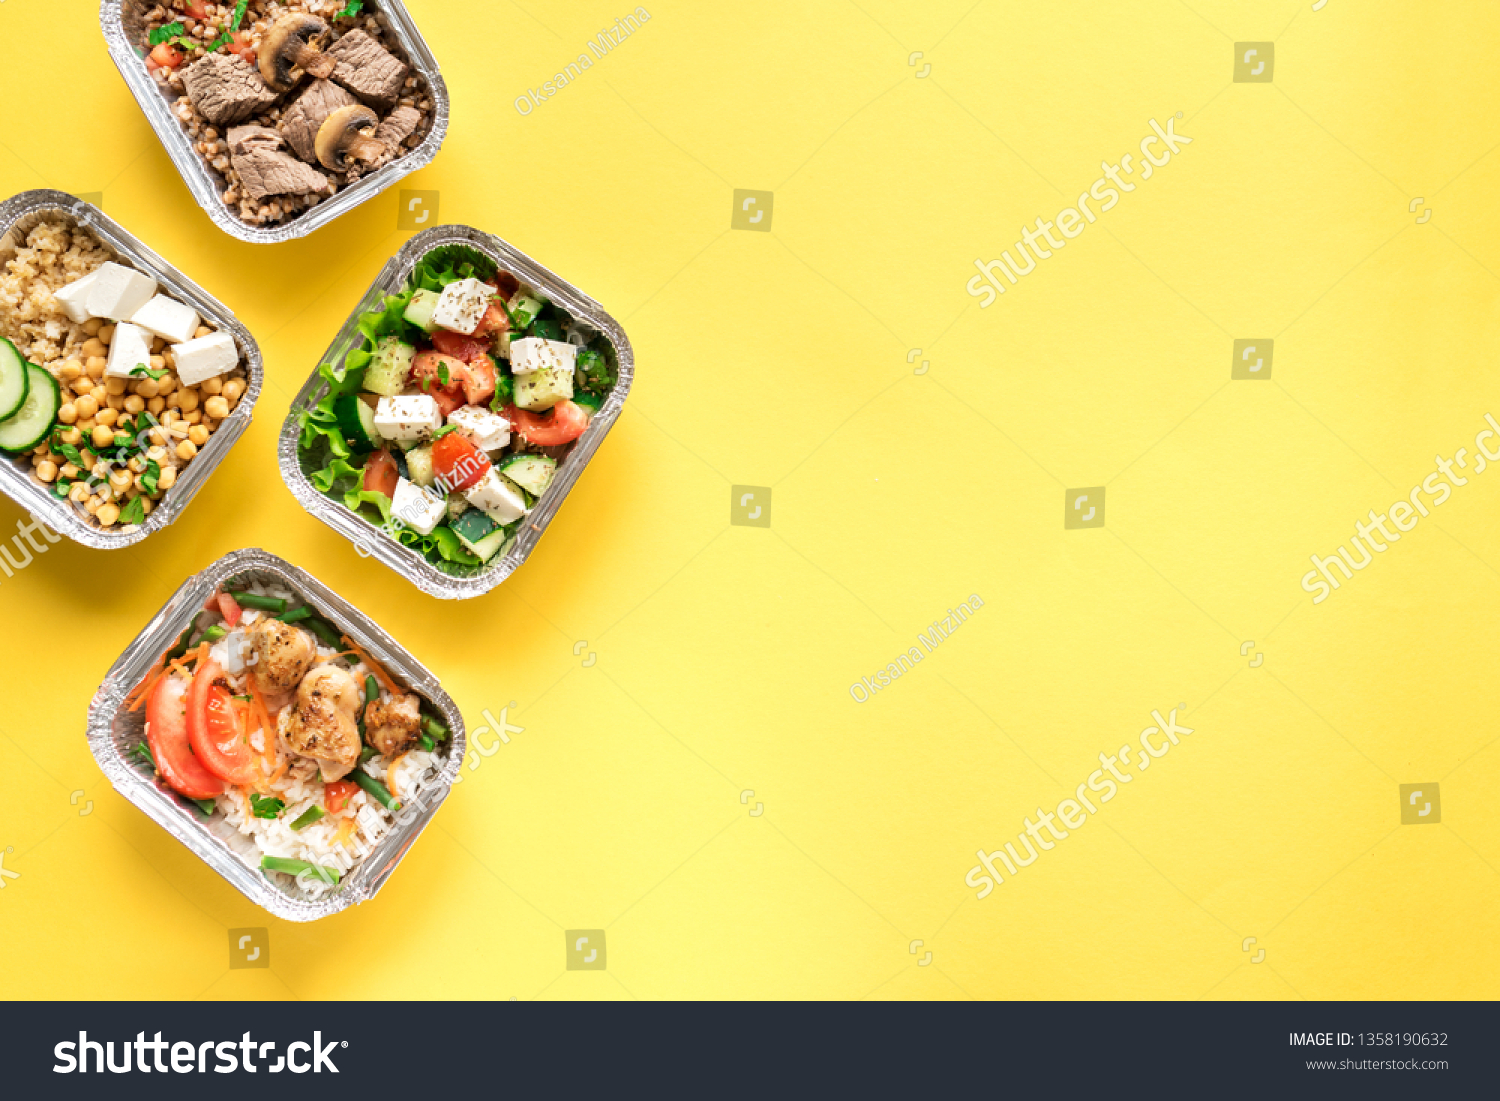 Healthy food delivery. Take away of organic daily meal on yellow, copy space. Clean eating concept, healthy food, fitness nutrition take away in foil boxes, top view. #1358190632